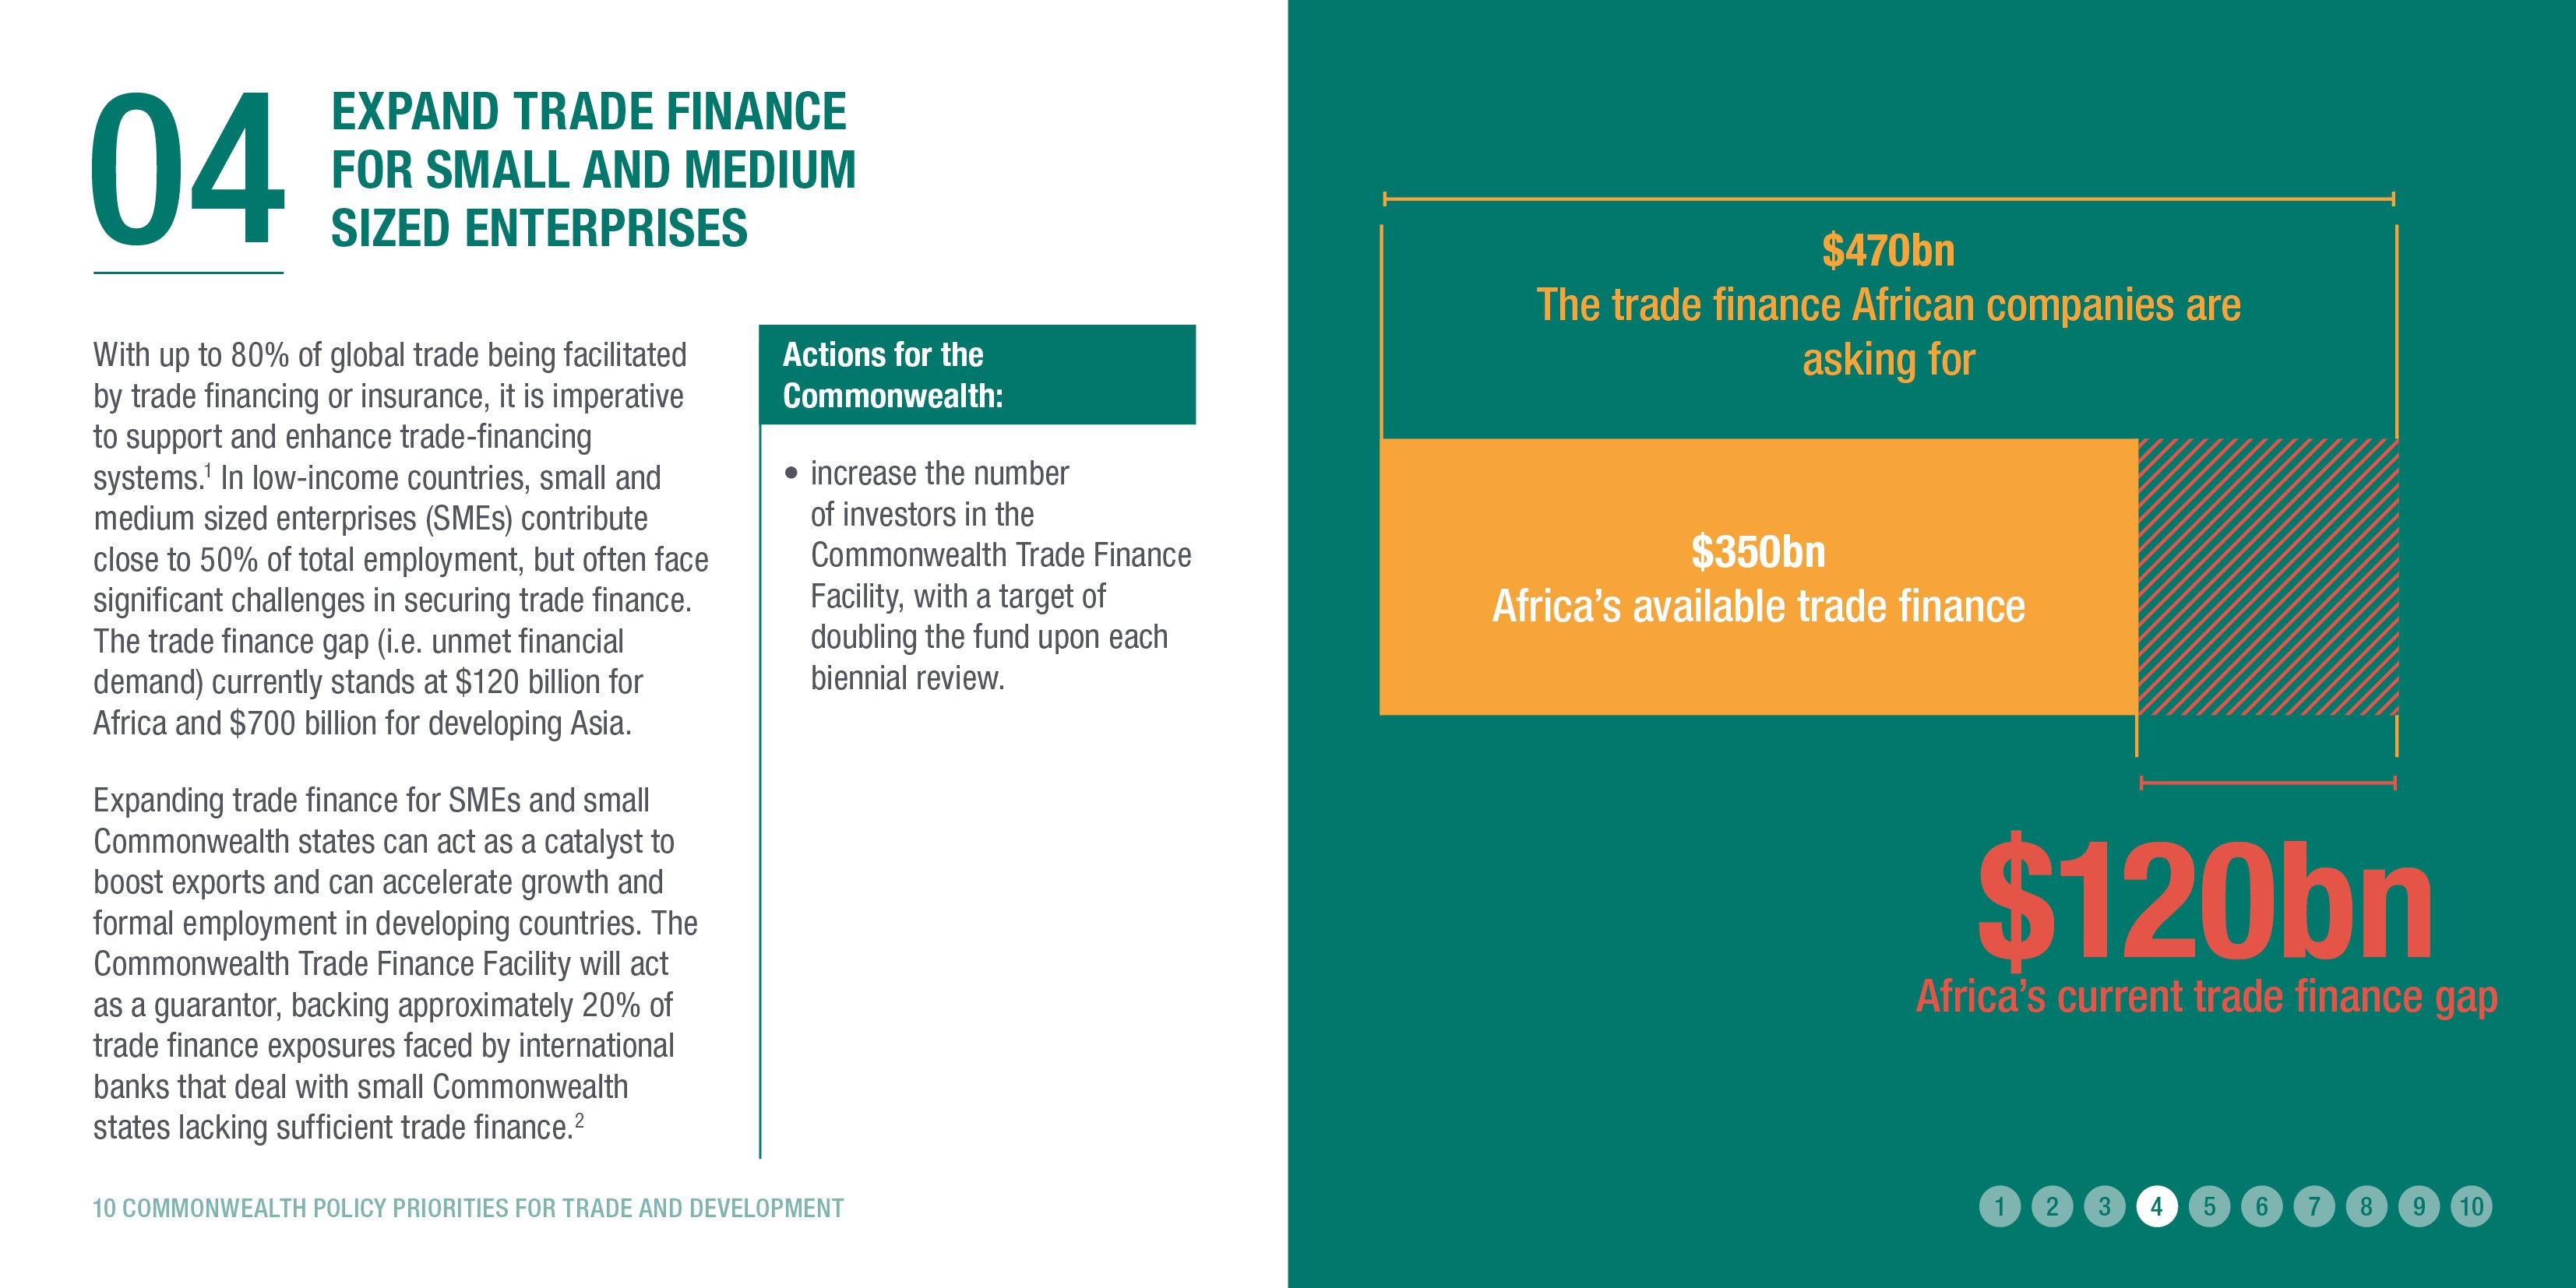 Expand trade finance for small and medium sized enterprises